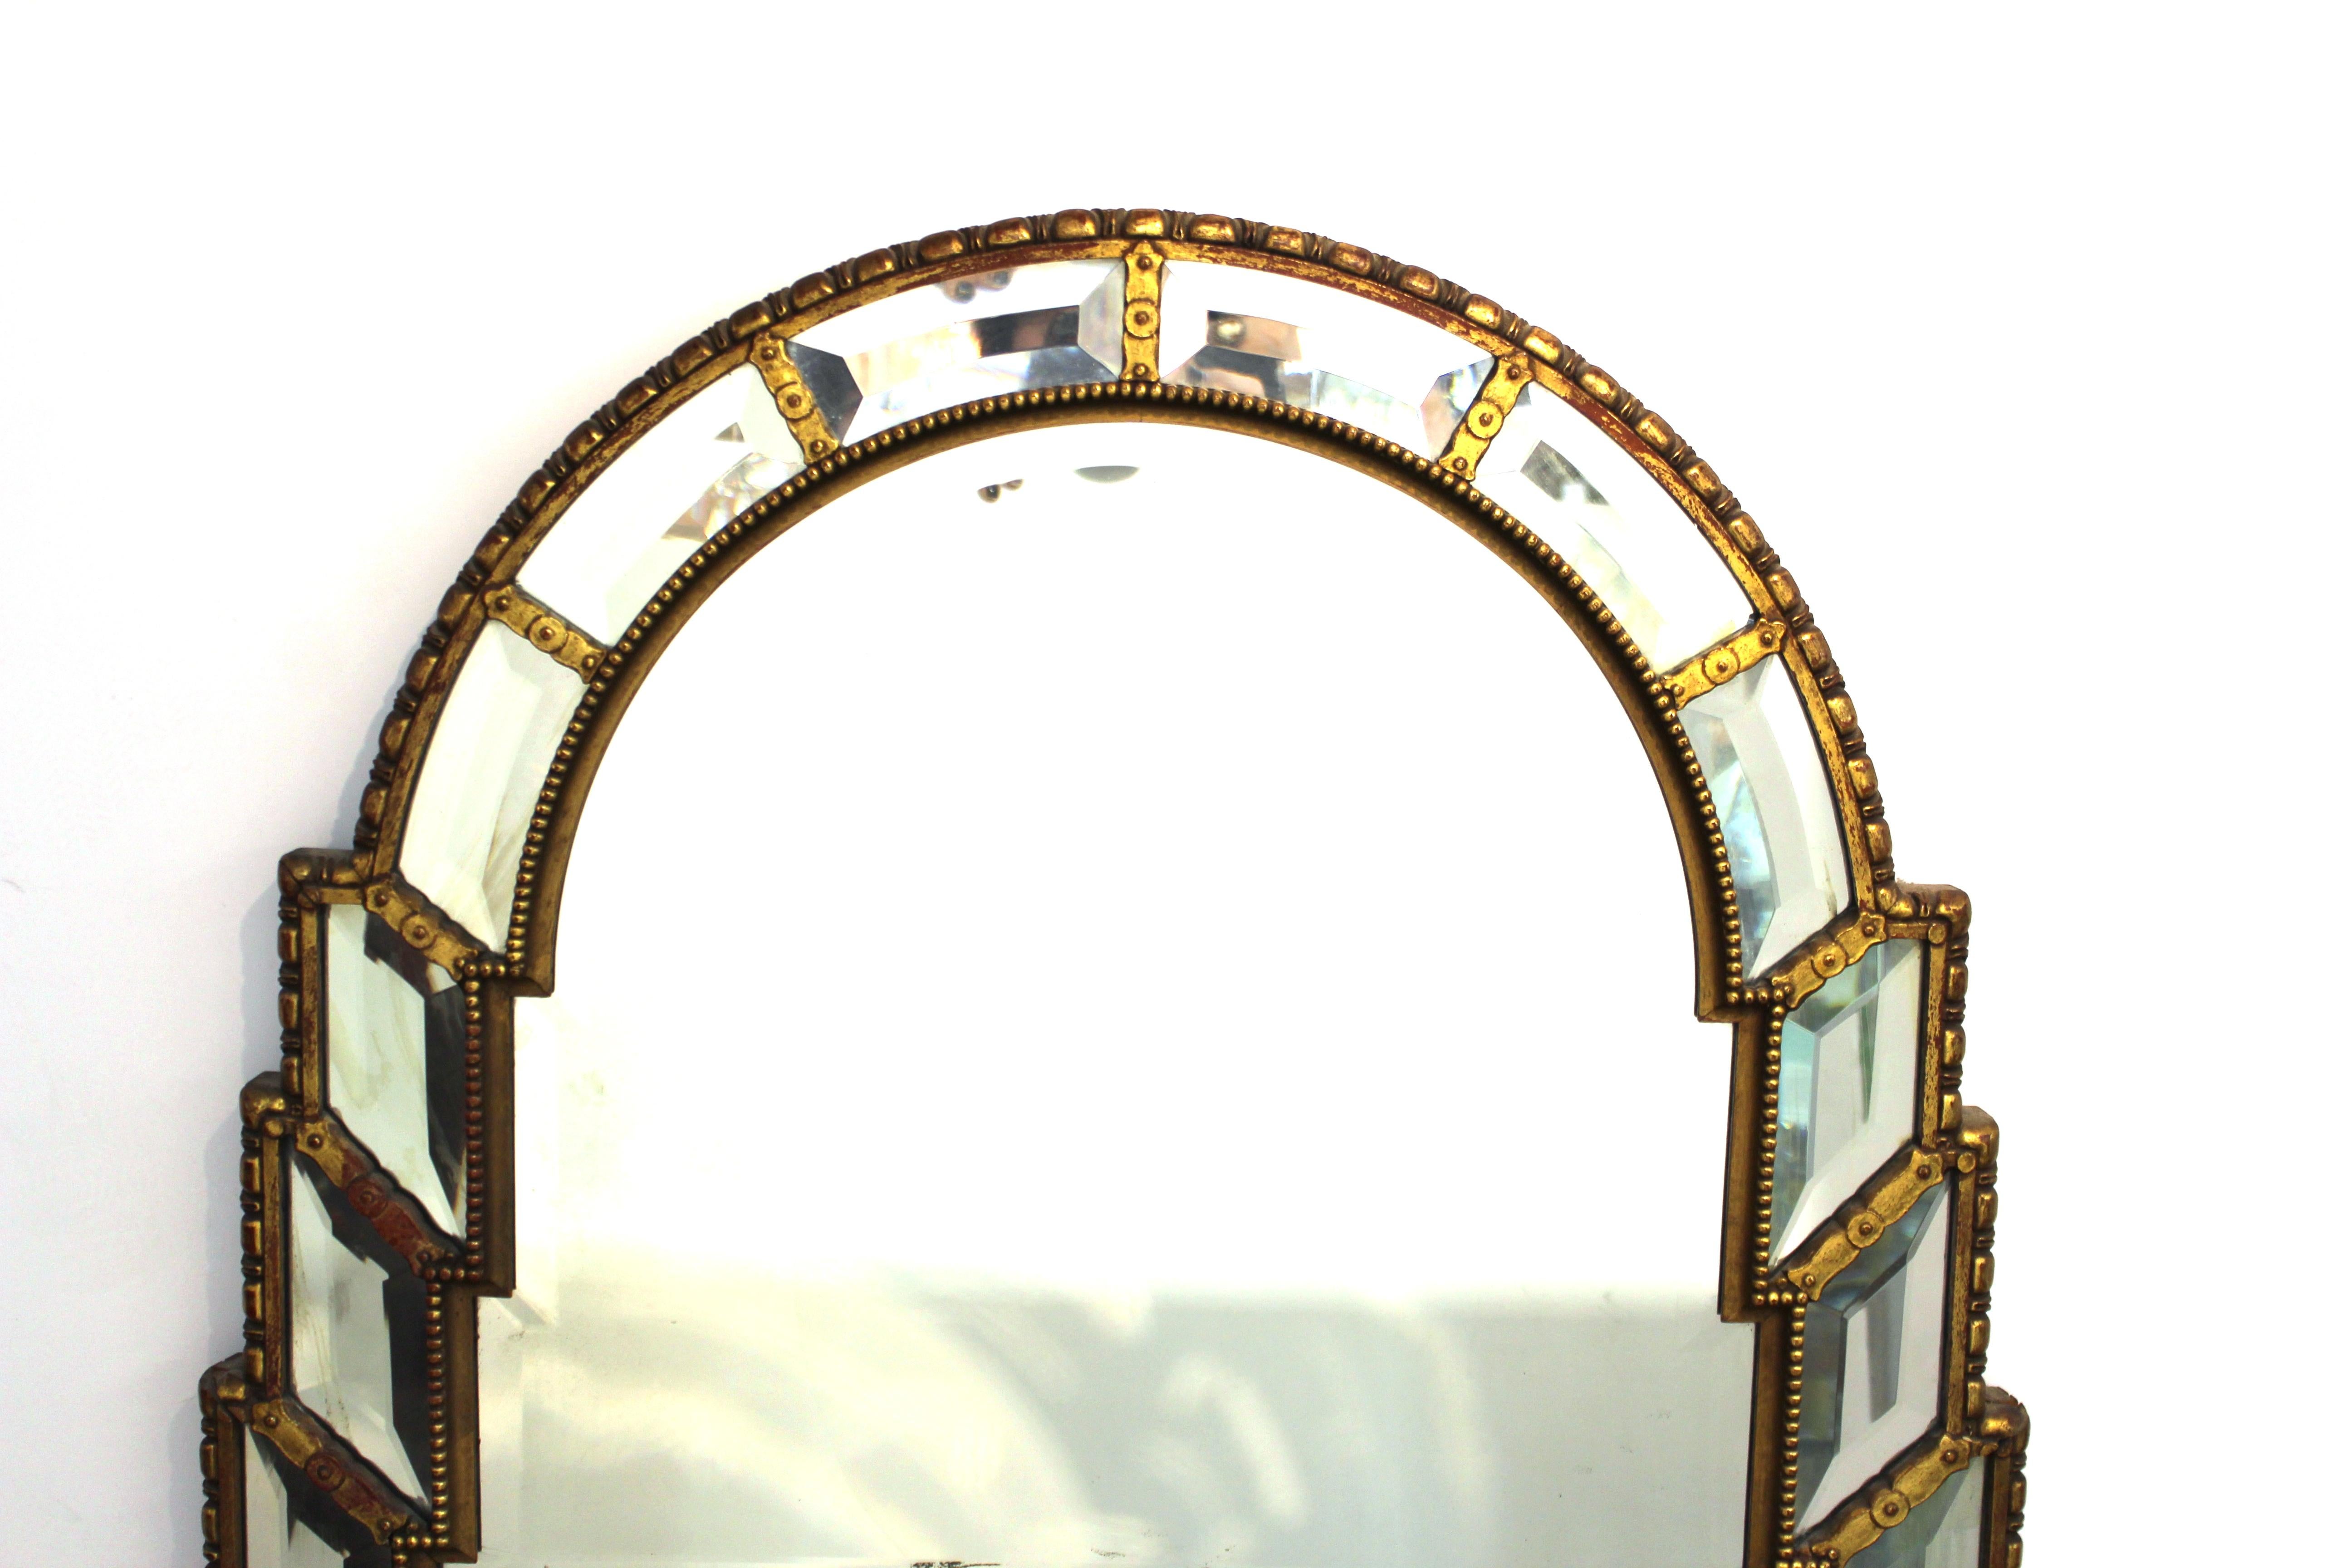 Hollywood Regency wall mirror with elaborate giltwood mirror frame. The piece is in great vintage condition with age-appropriate wear.